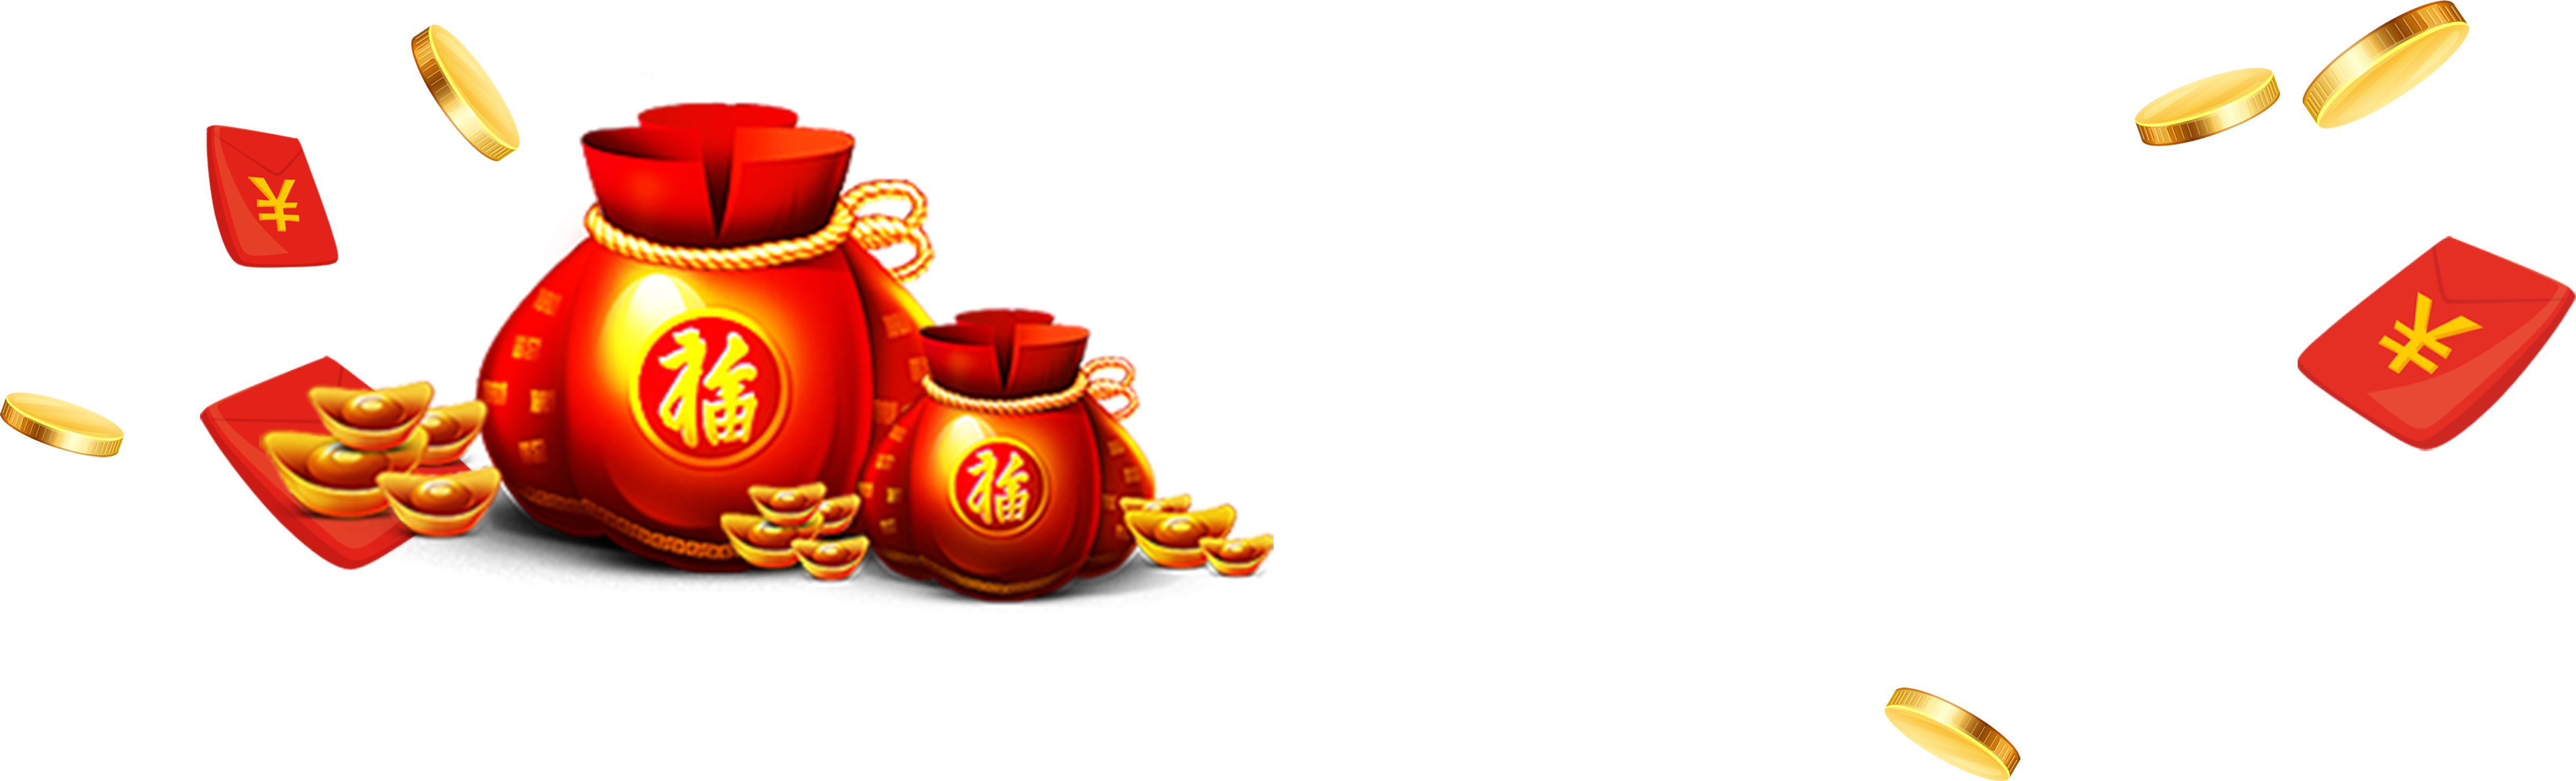 Chinese New Year PNG transparent image download, size: 1181x1181px